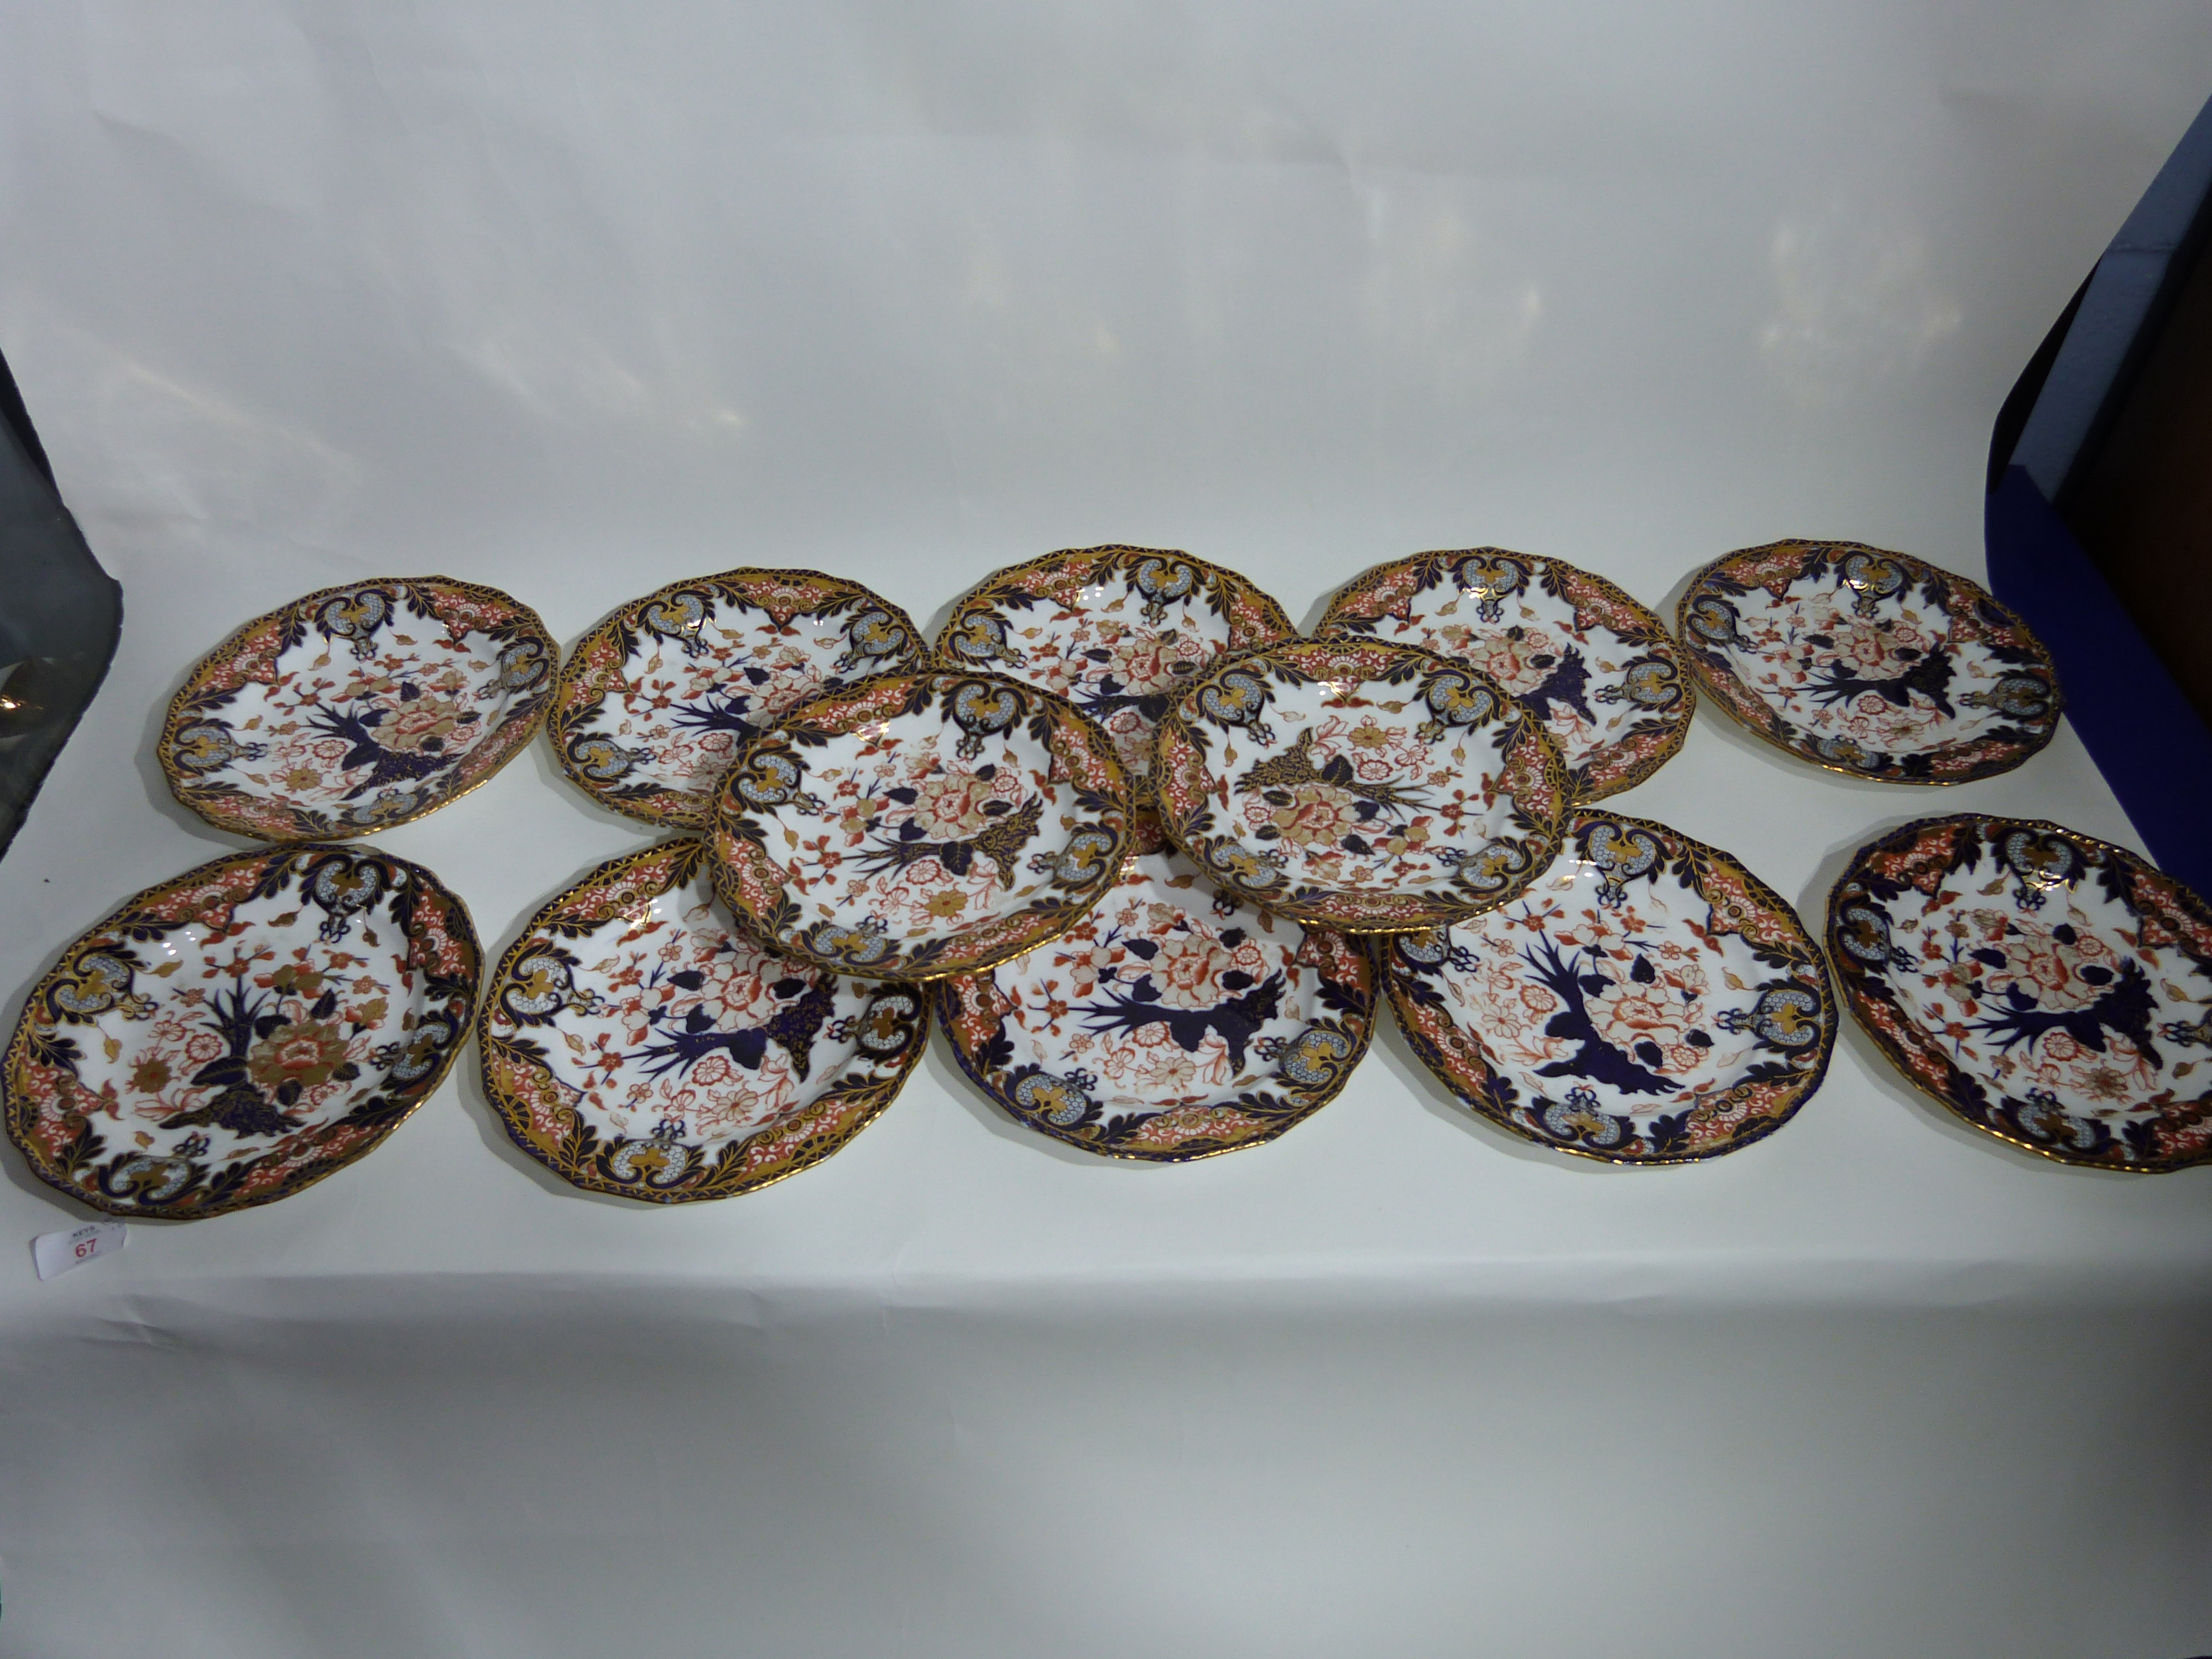 Set of 12 19th century Crown Derby plates all with typical Imari designs in blue, gilt and red, - Image 2 of 4